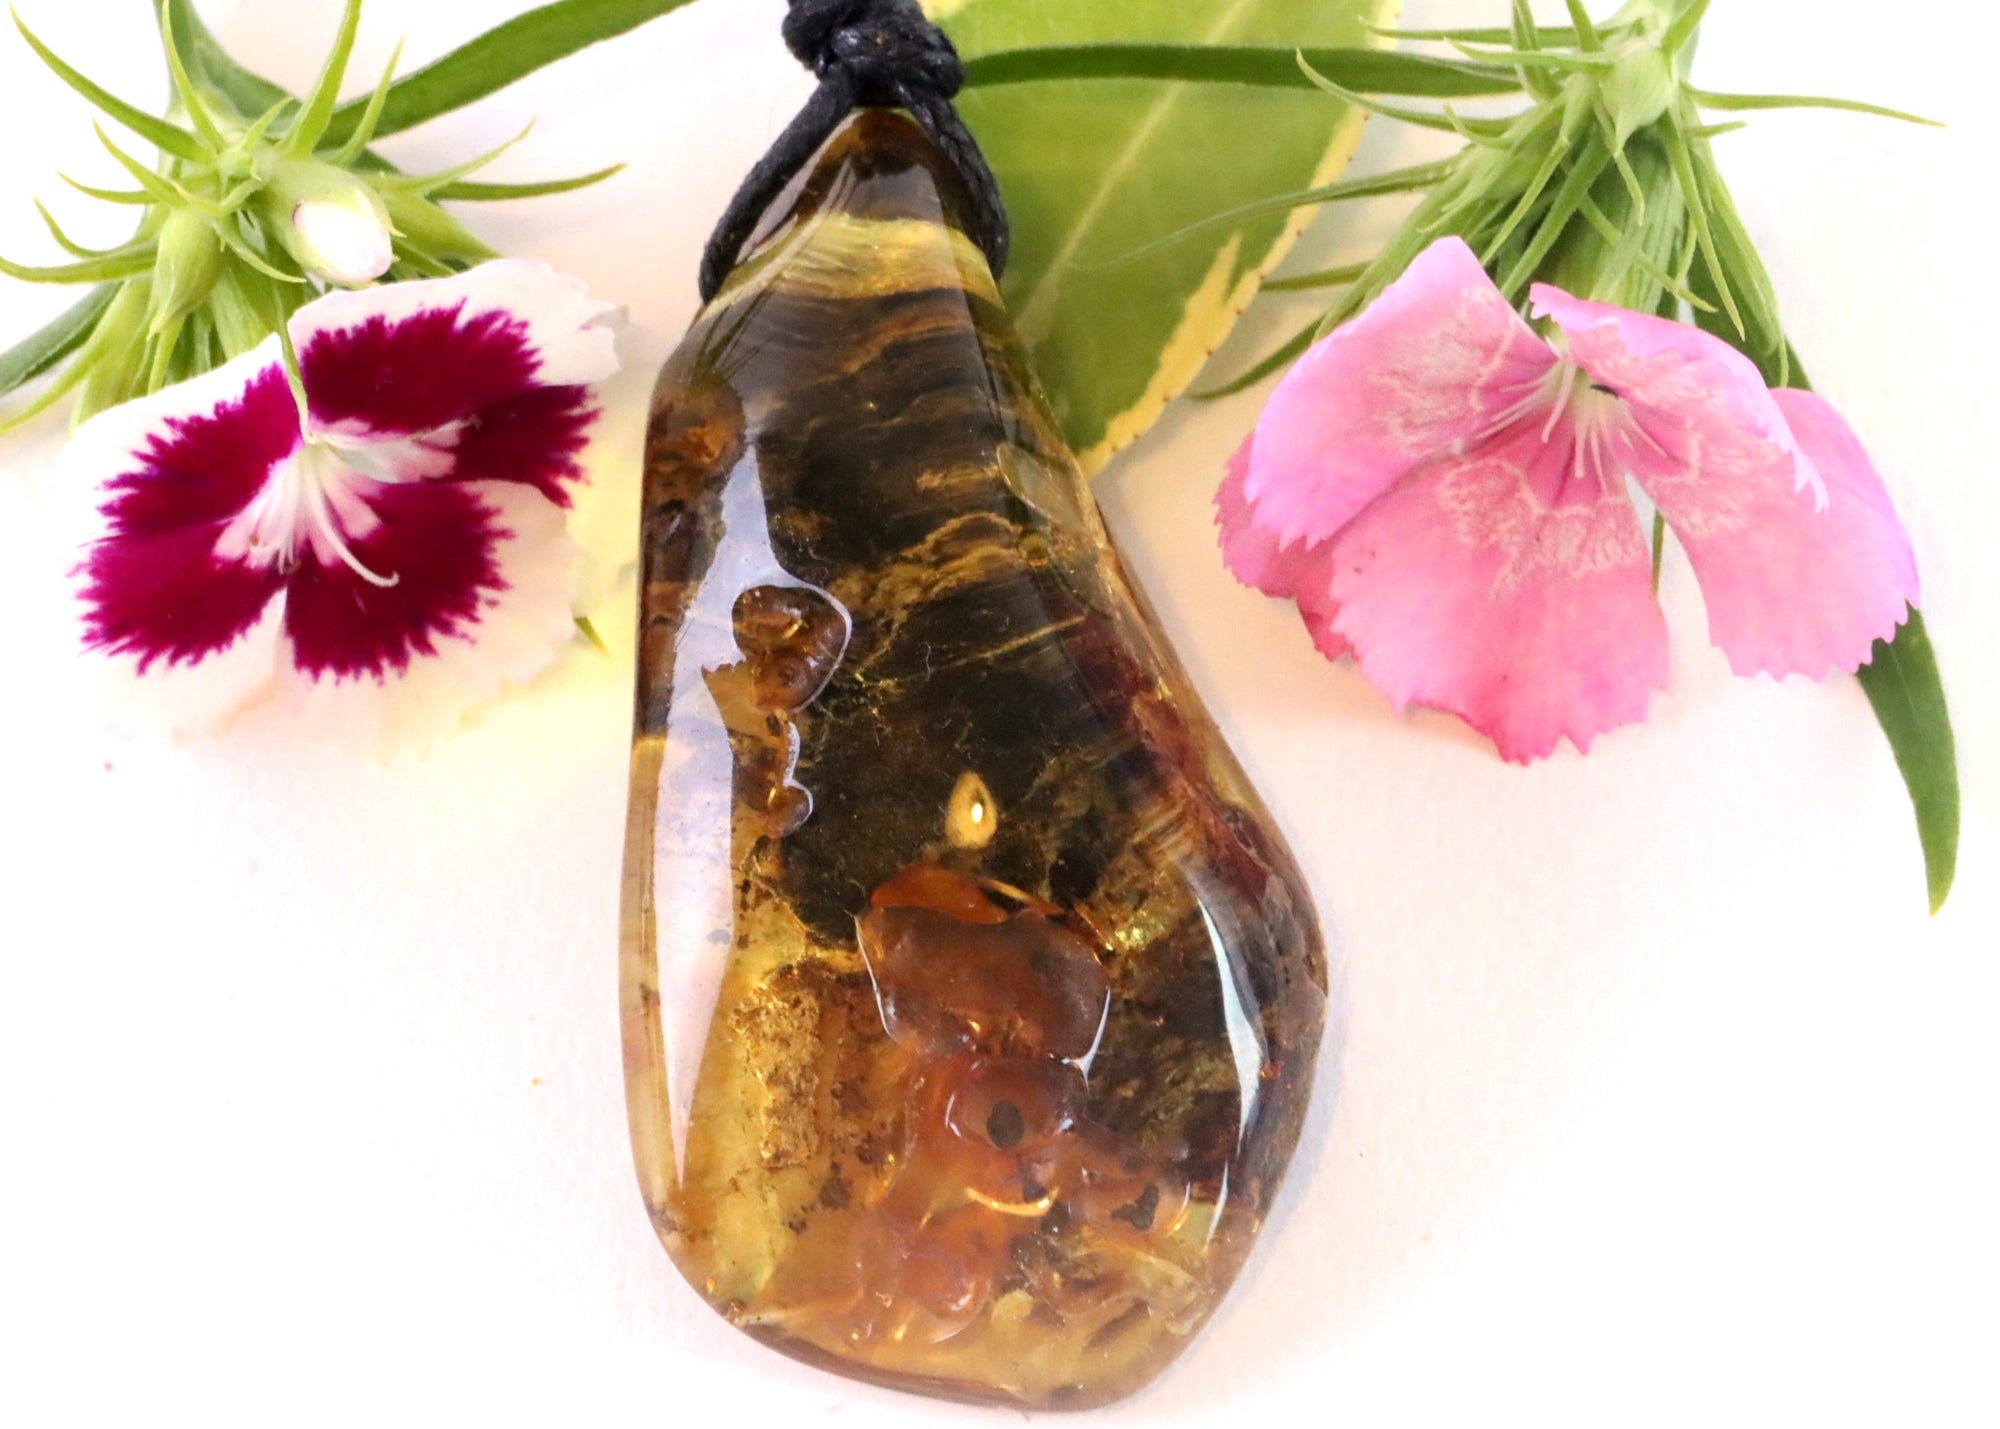 Quirky Natural Handmade Amber Amulet Pendant